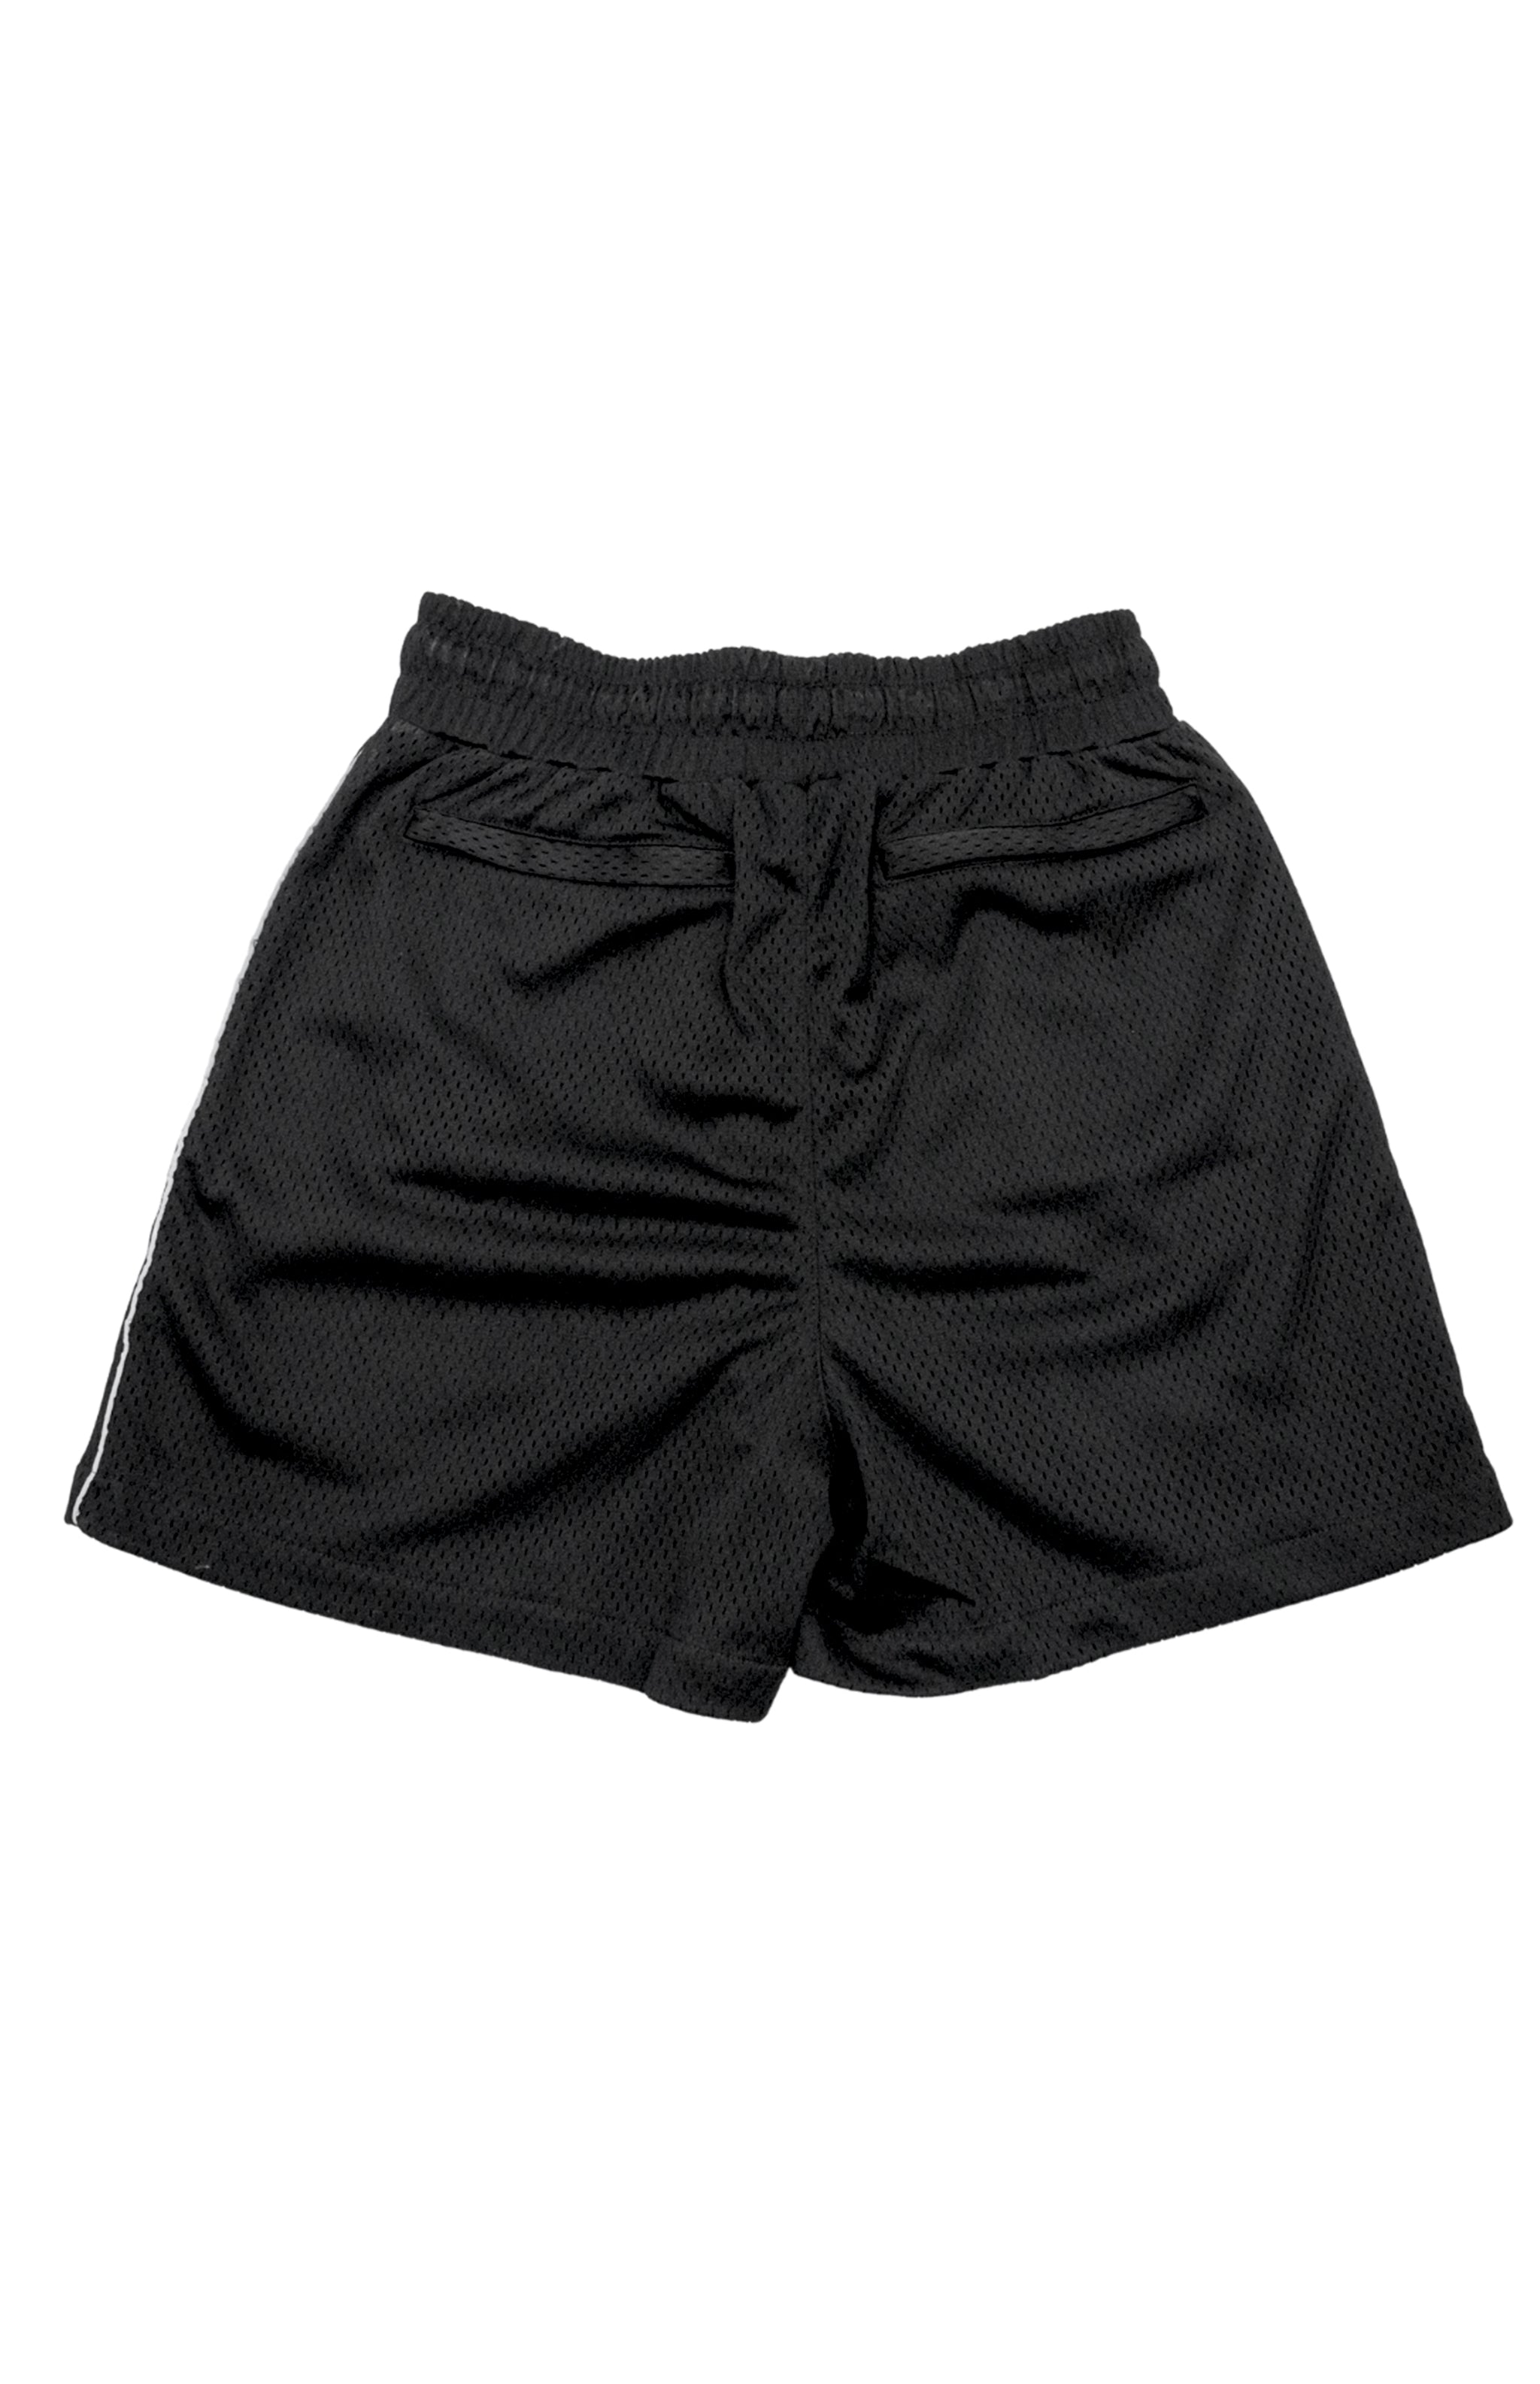 Heria Mesh Shorts with 3M Reflective Piping - Black – Chris Heria